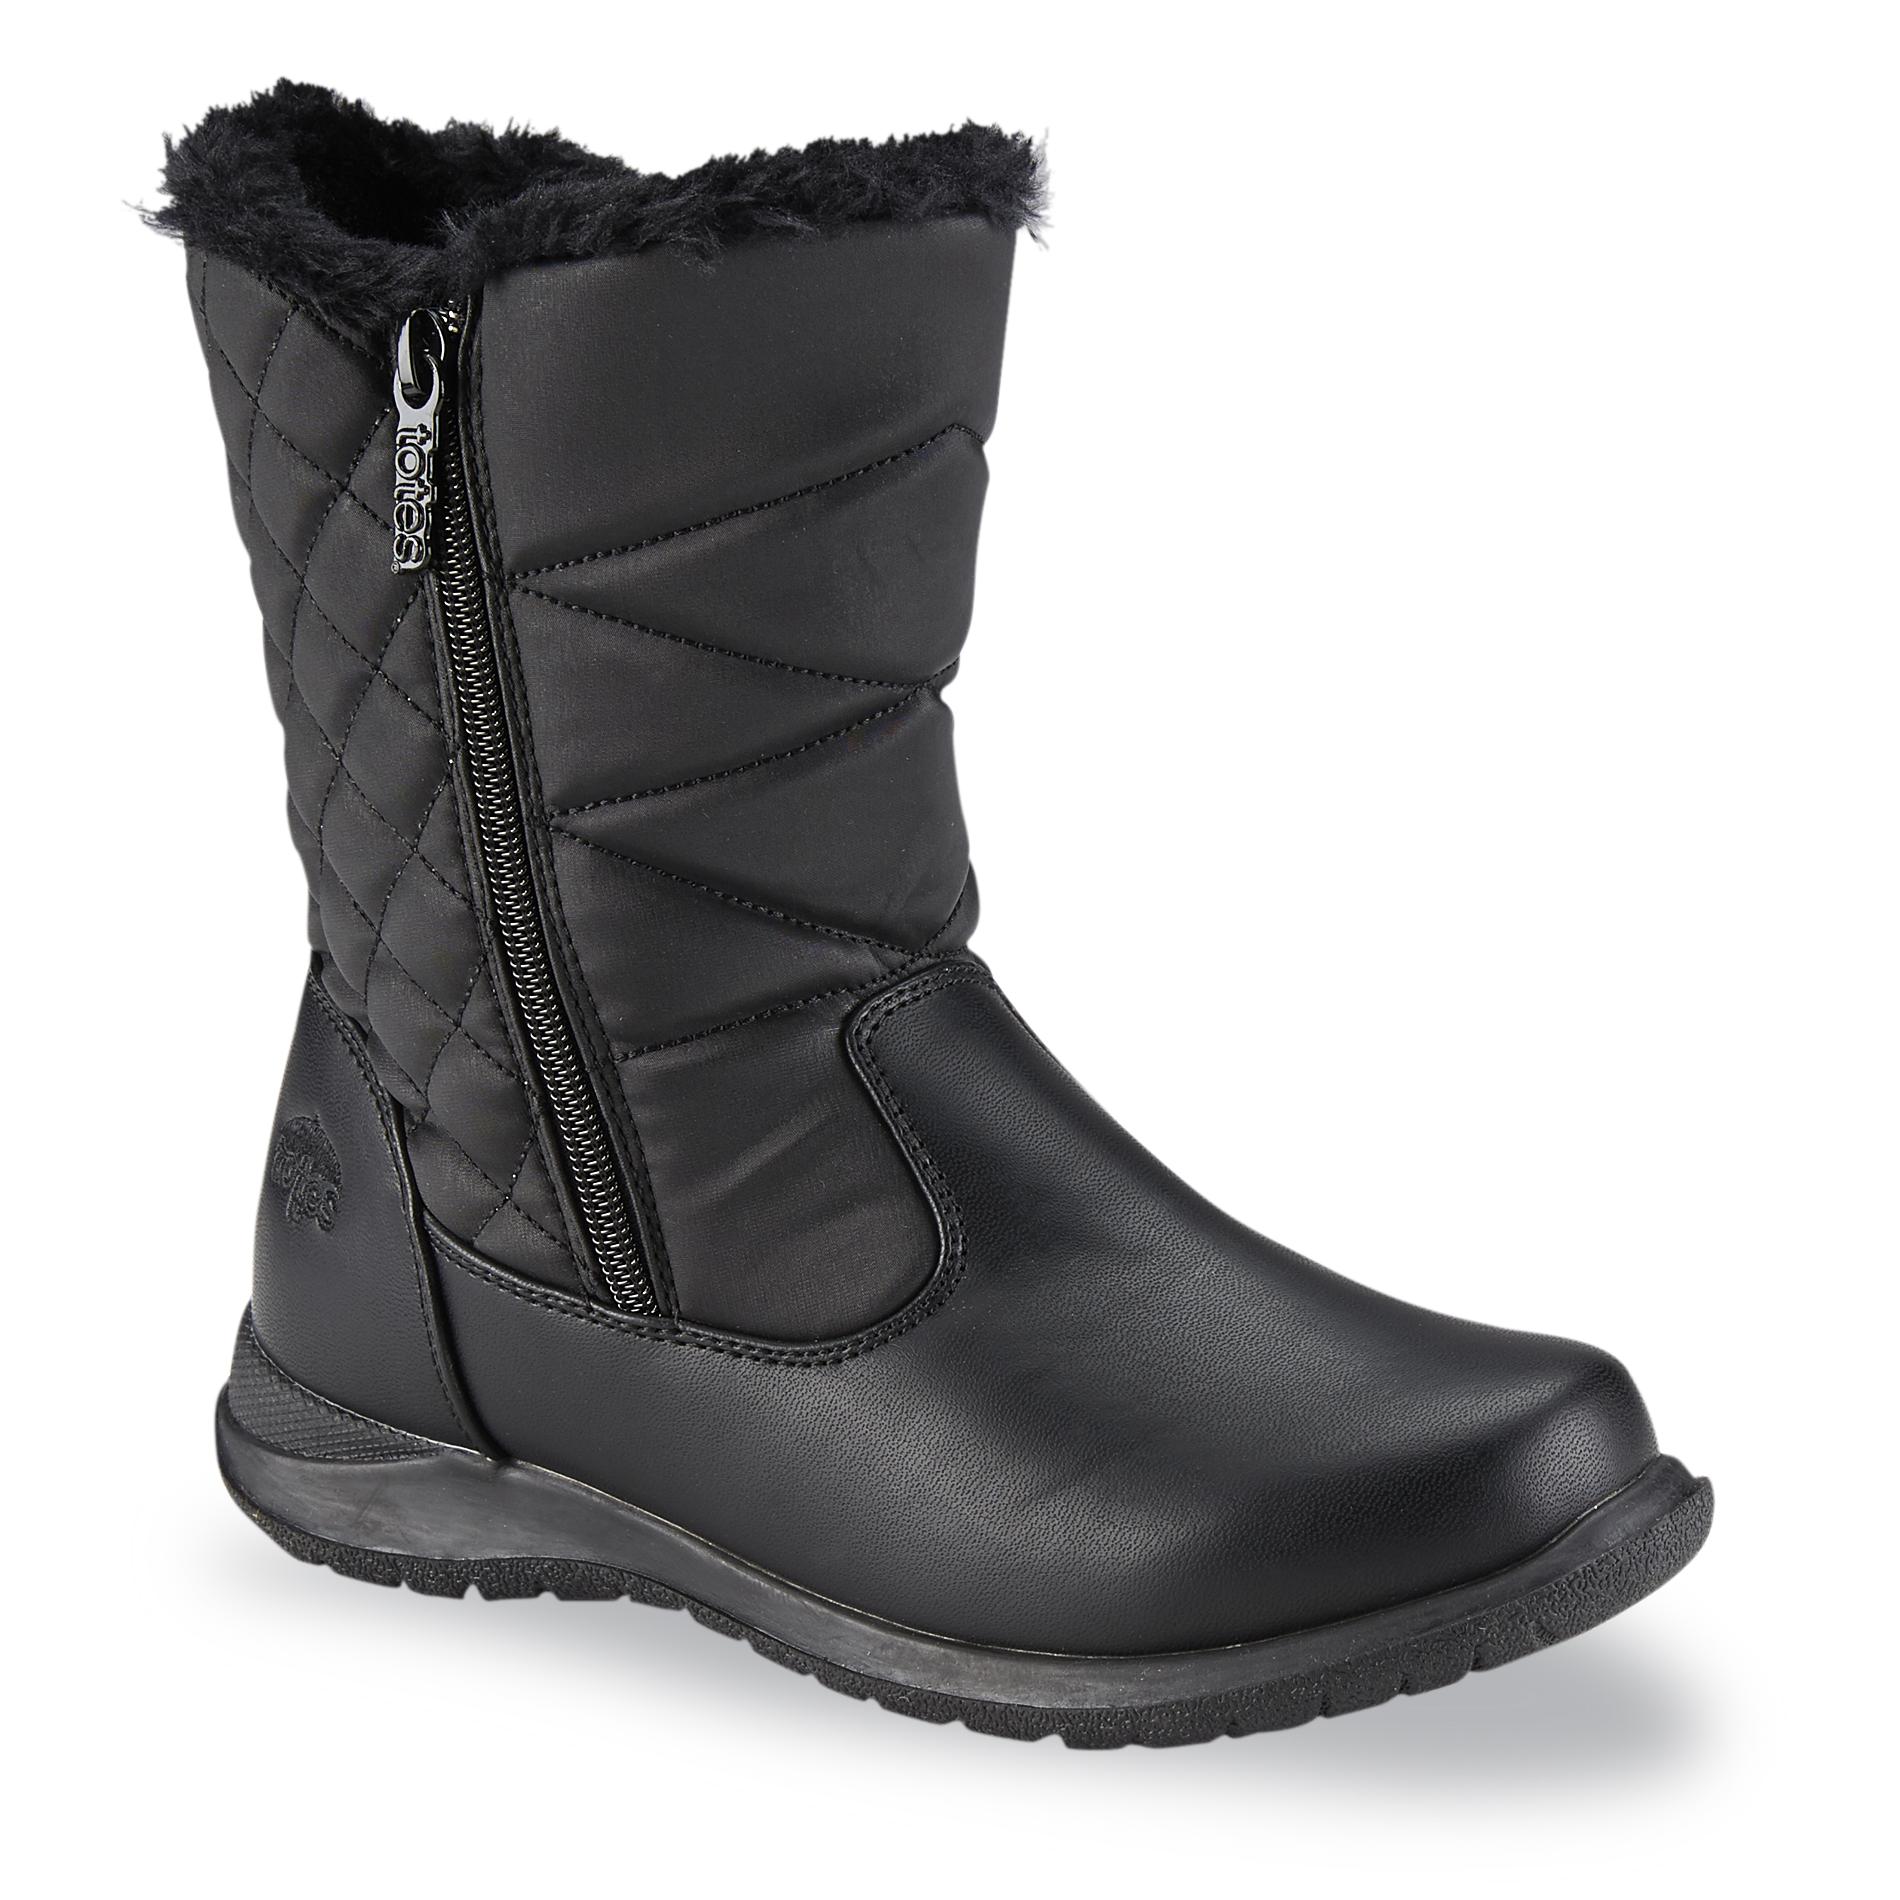 Waterproof Snow Boots For Women On Sale - Boot Yc